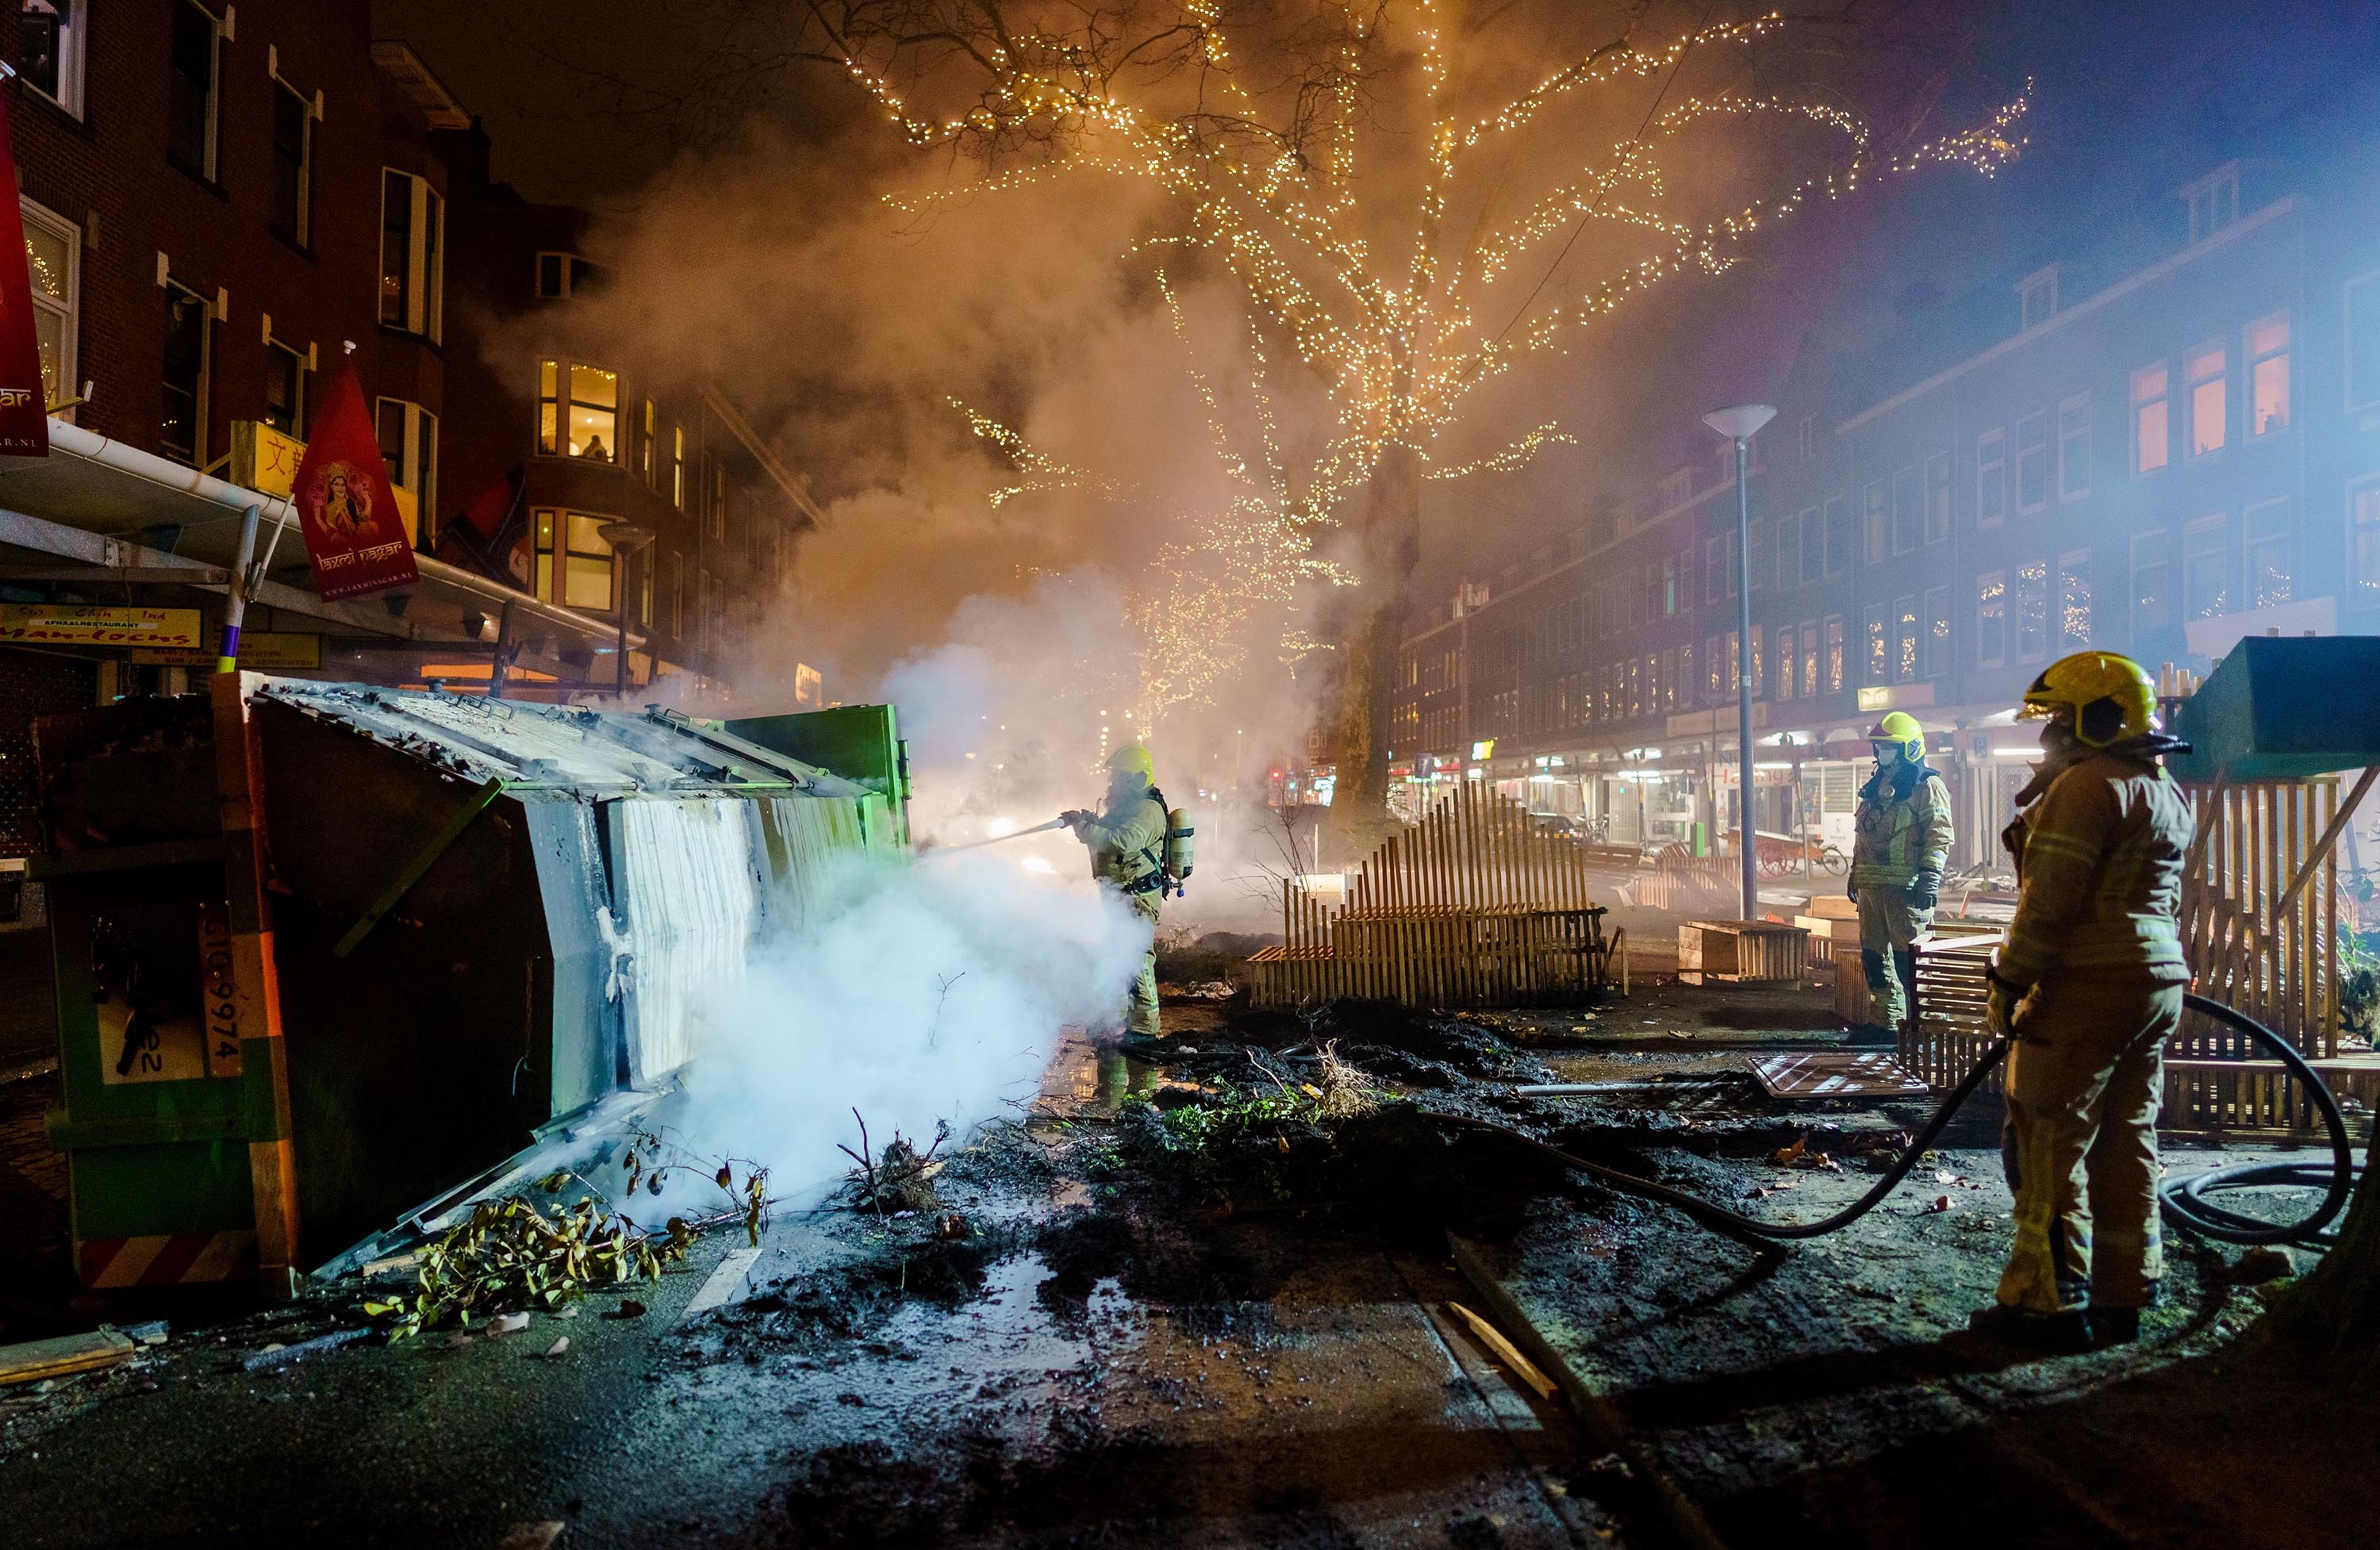 Firefighters work to extinguish a fire in Rotterdam on January 25, after a wave of riots in the Netherlands in response to a coronavirus curfew introduced over the weekend.